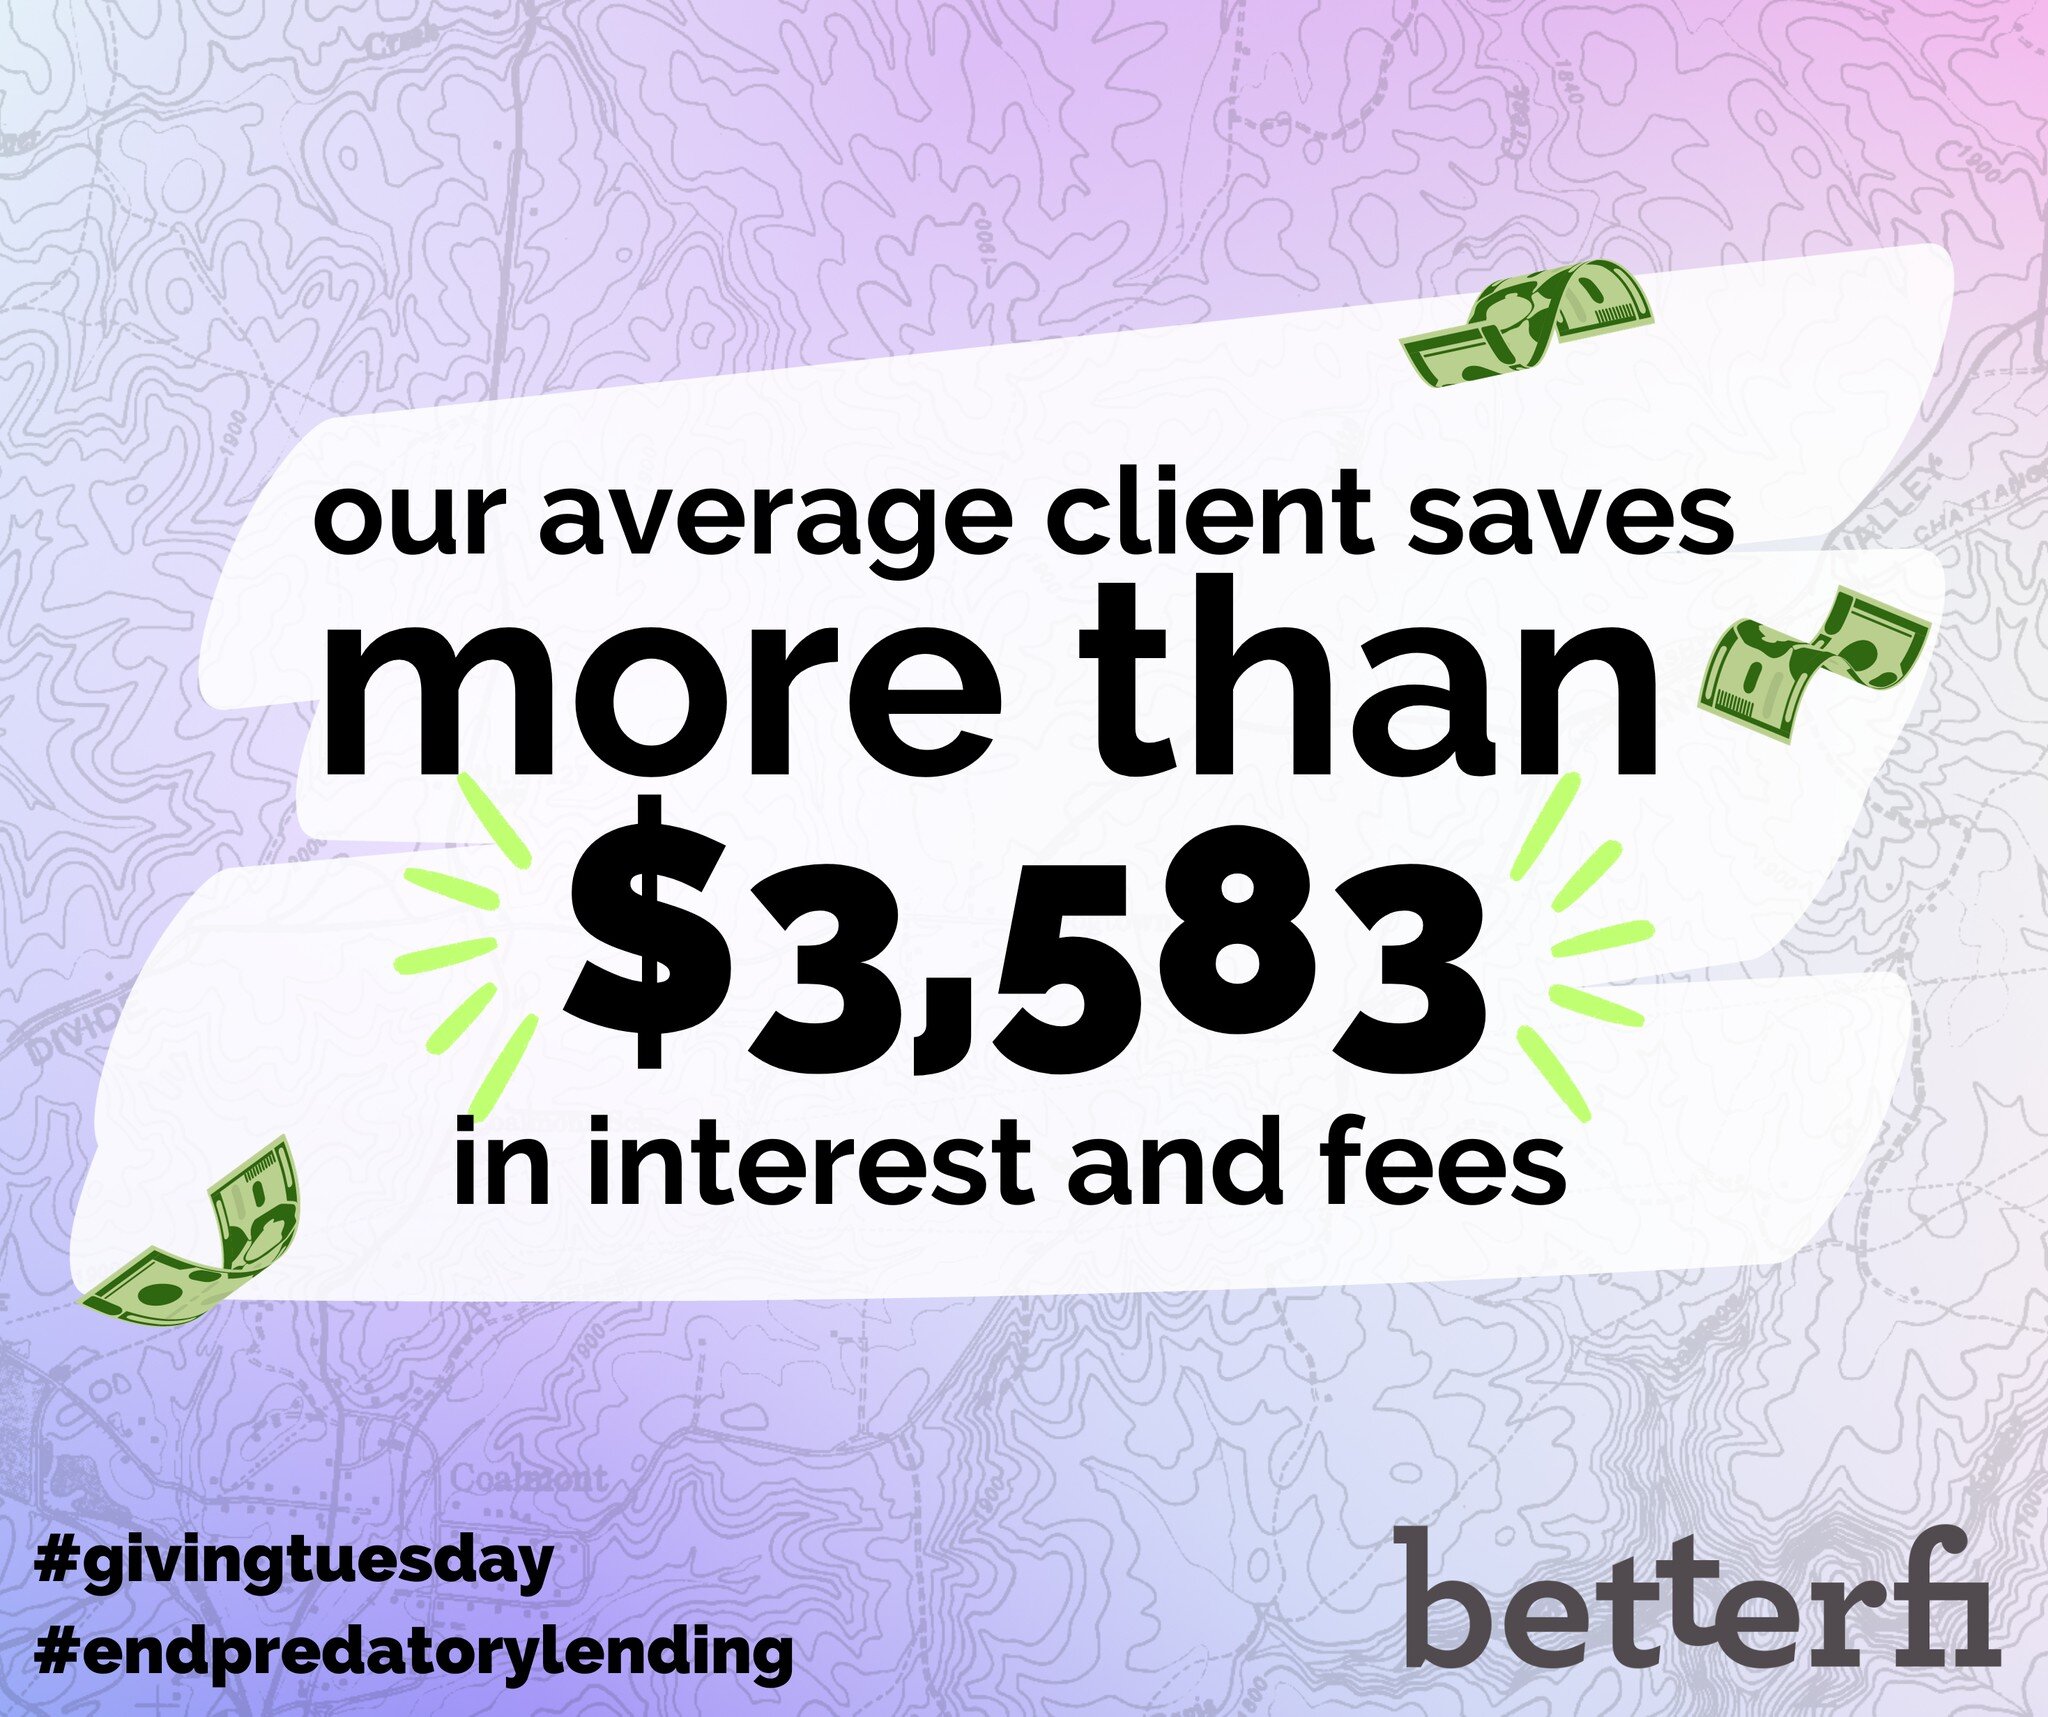 This #GivingTuesday, consider contributing to our work to offer an alternative to predatory lending.

The only credit option for most of our underbanked neighbors is payday, title, or flex loans that come with astronomical interest-and-fee rates. A t